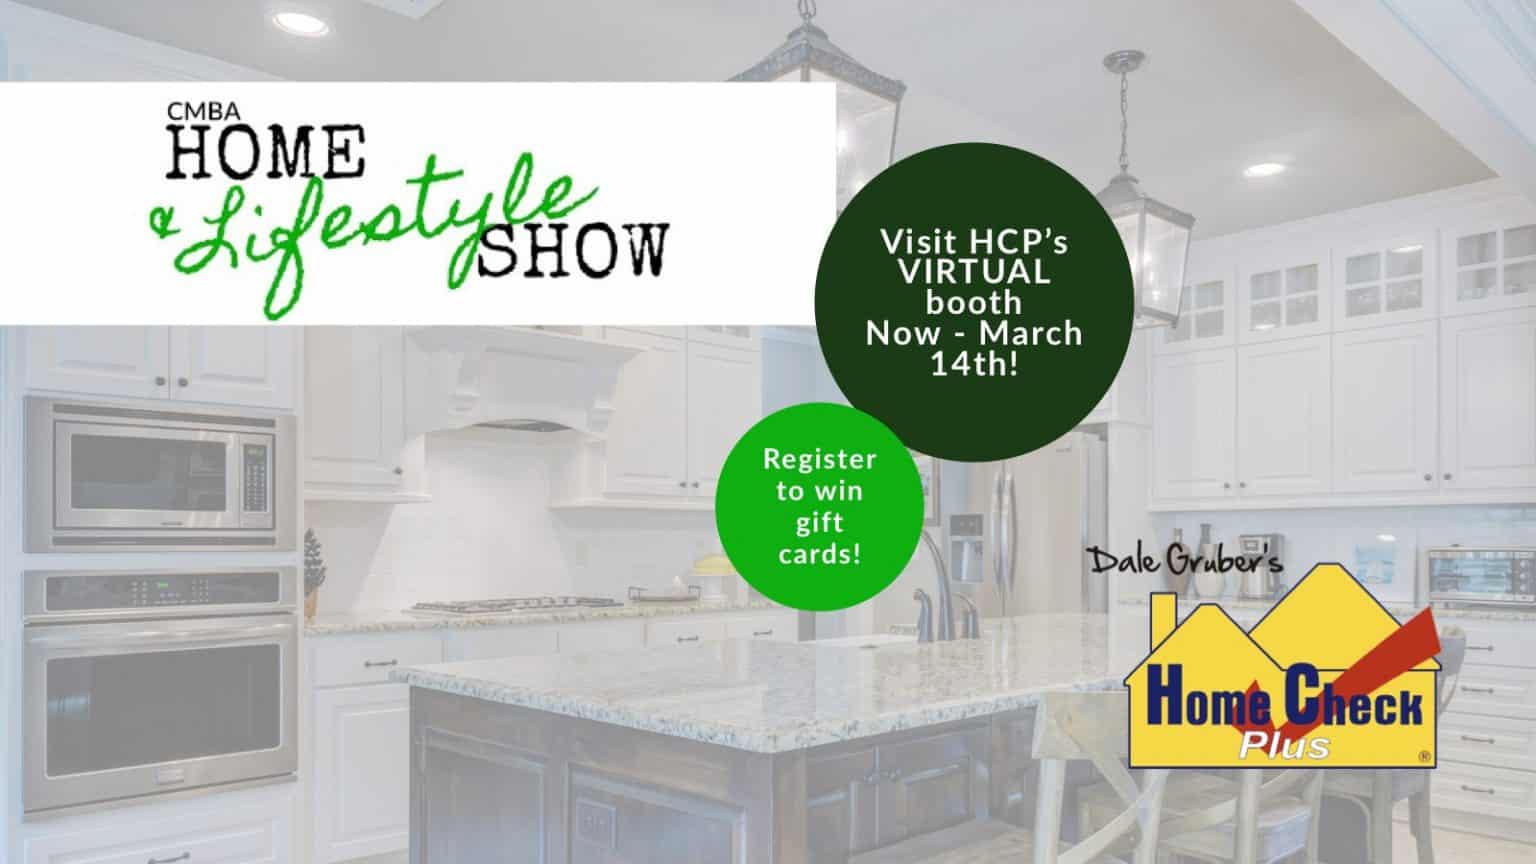 CMBA Virtual Home & Lifestyle Show!